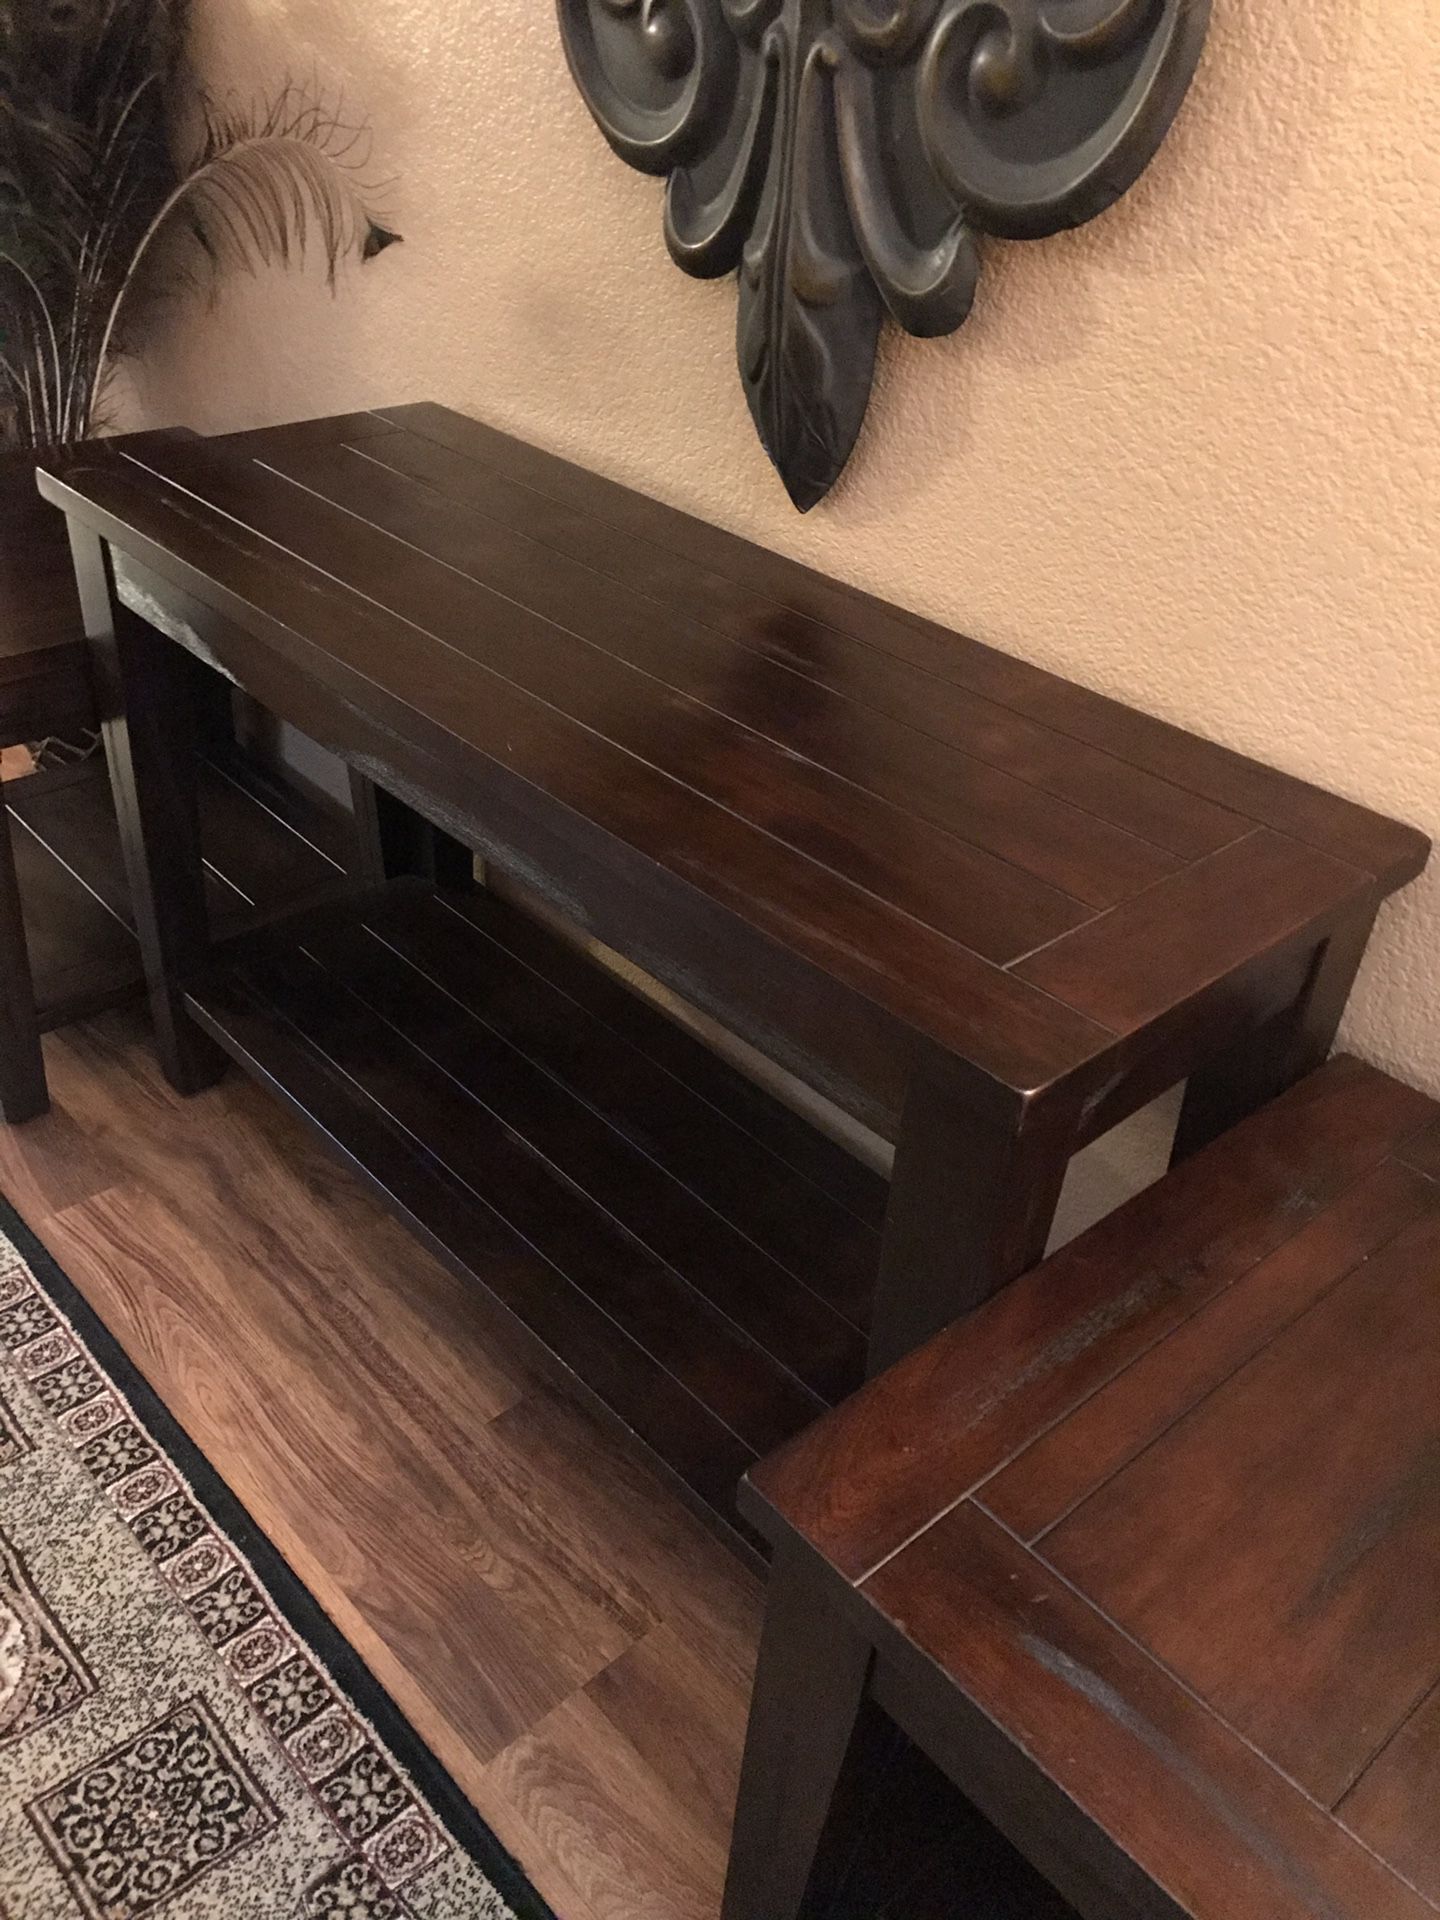 Beautiful, Elegant, Heavy, Very Sturdy & Almost NEW tables Set, Real Wood, Dark Brown Color.